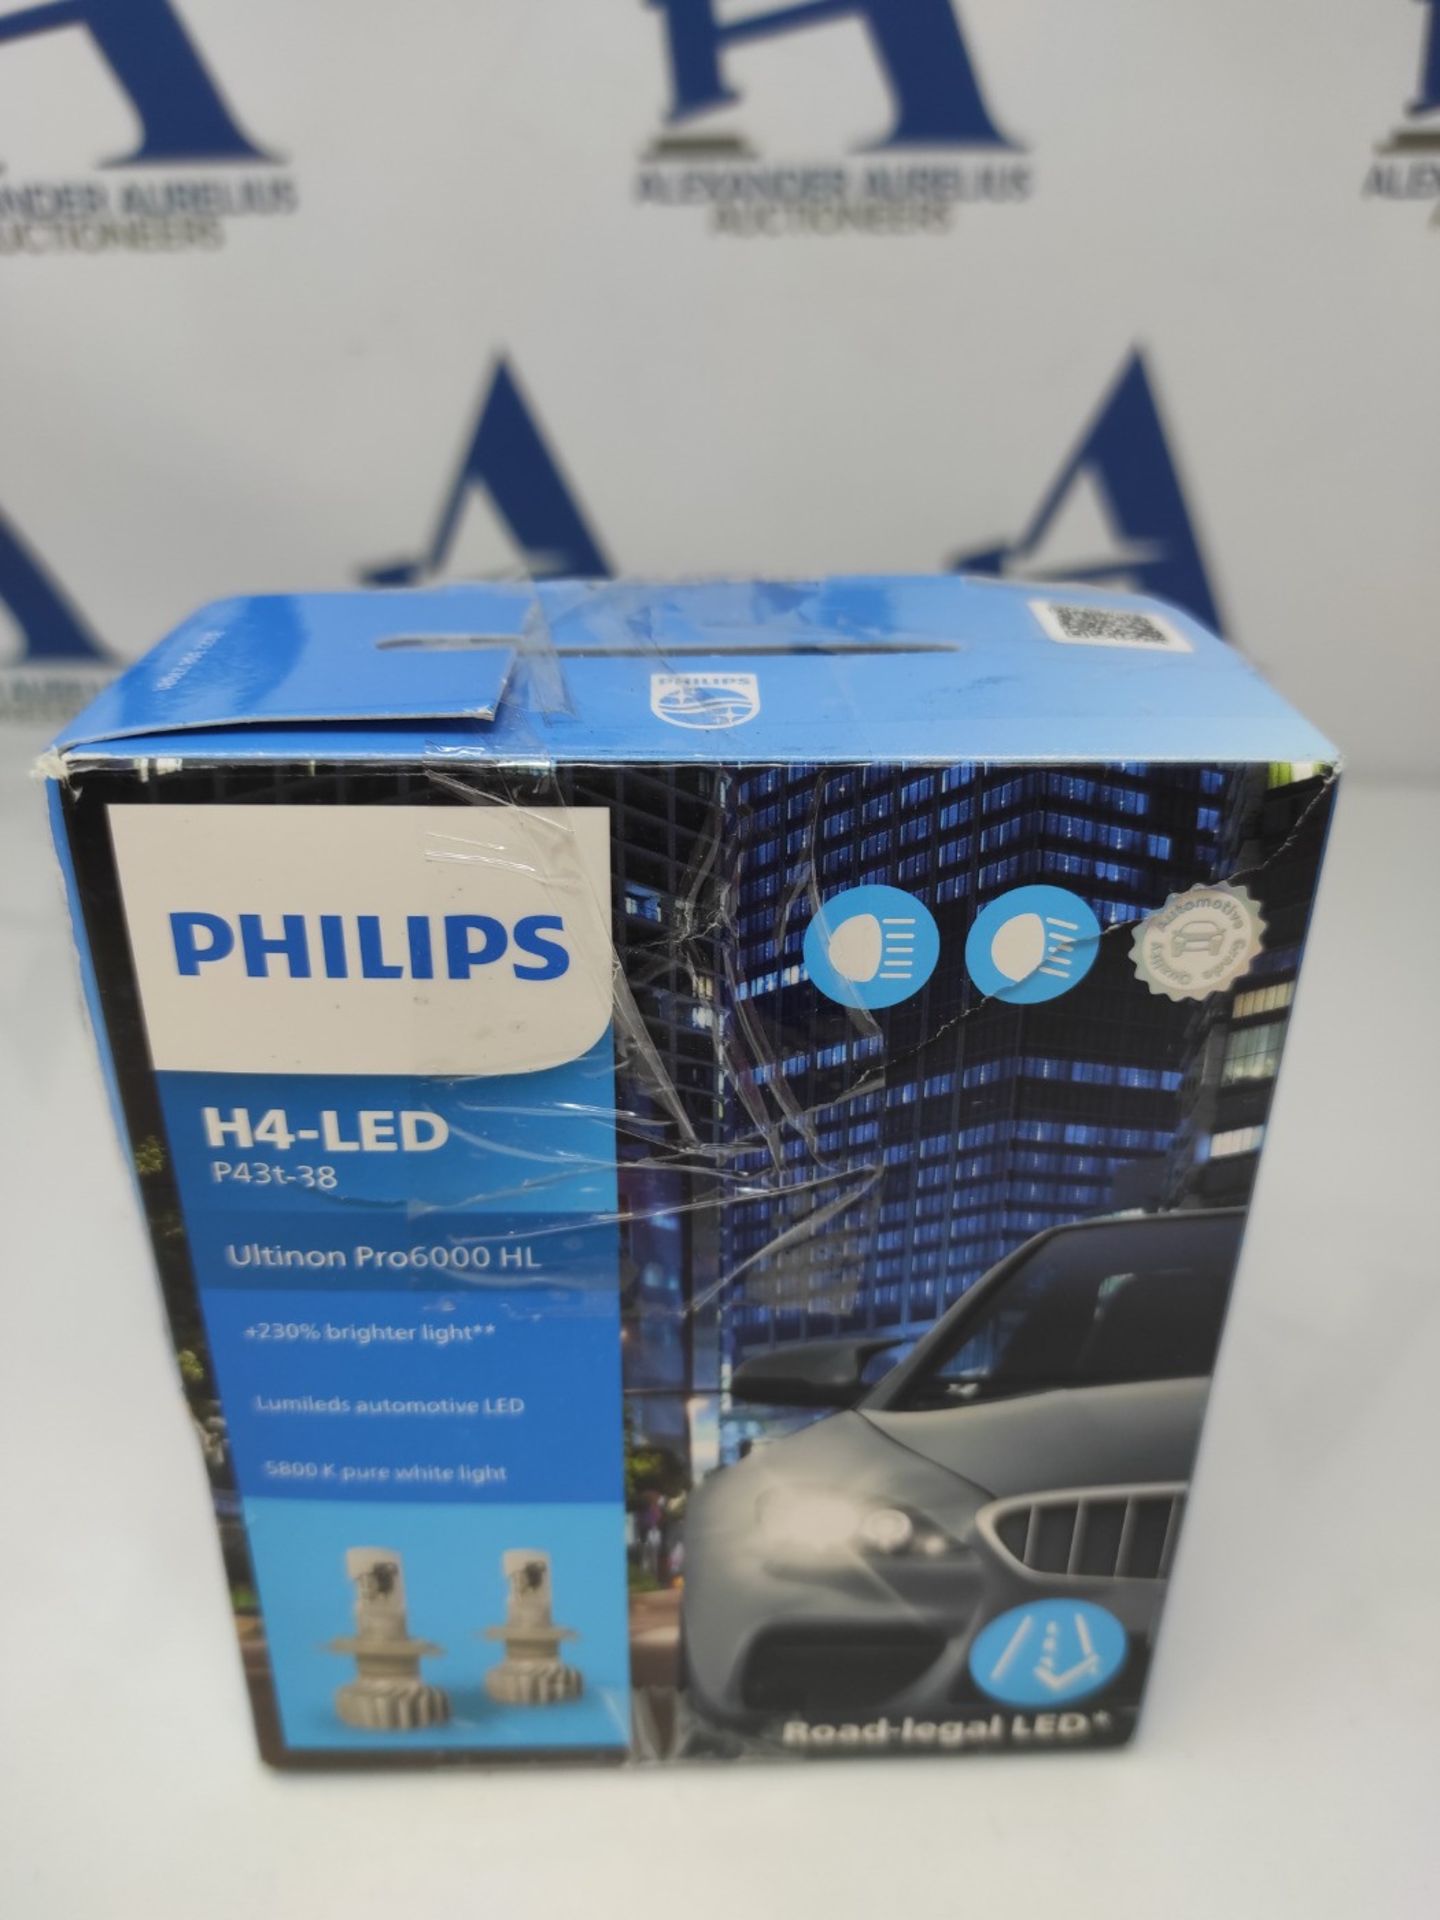 RRP £94.00 Philips Ultinon Pro6000 H4-LED headlight bulb with road approval, 230% brighter light, - Bild 2 aus 3